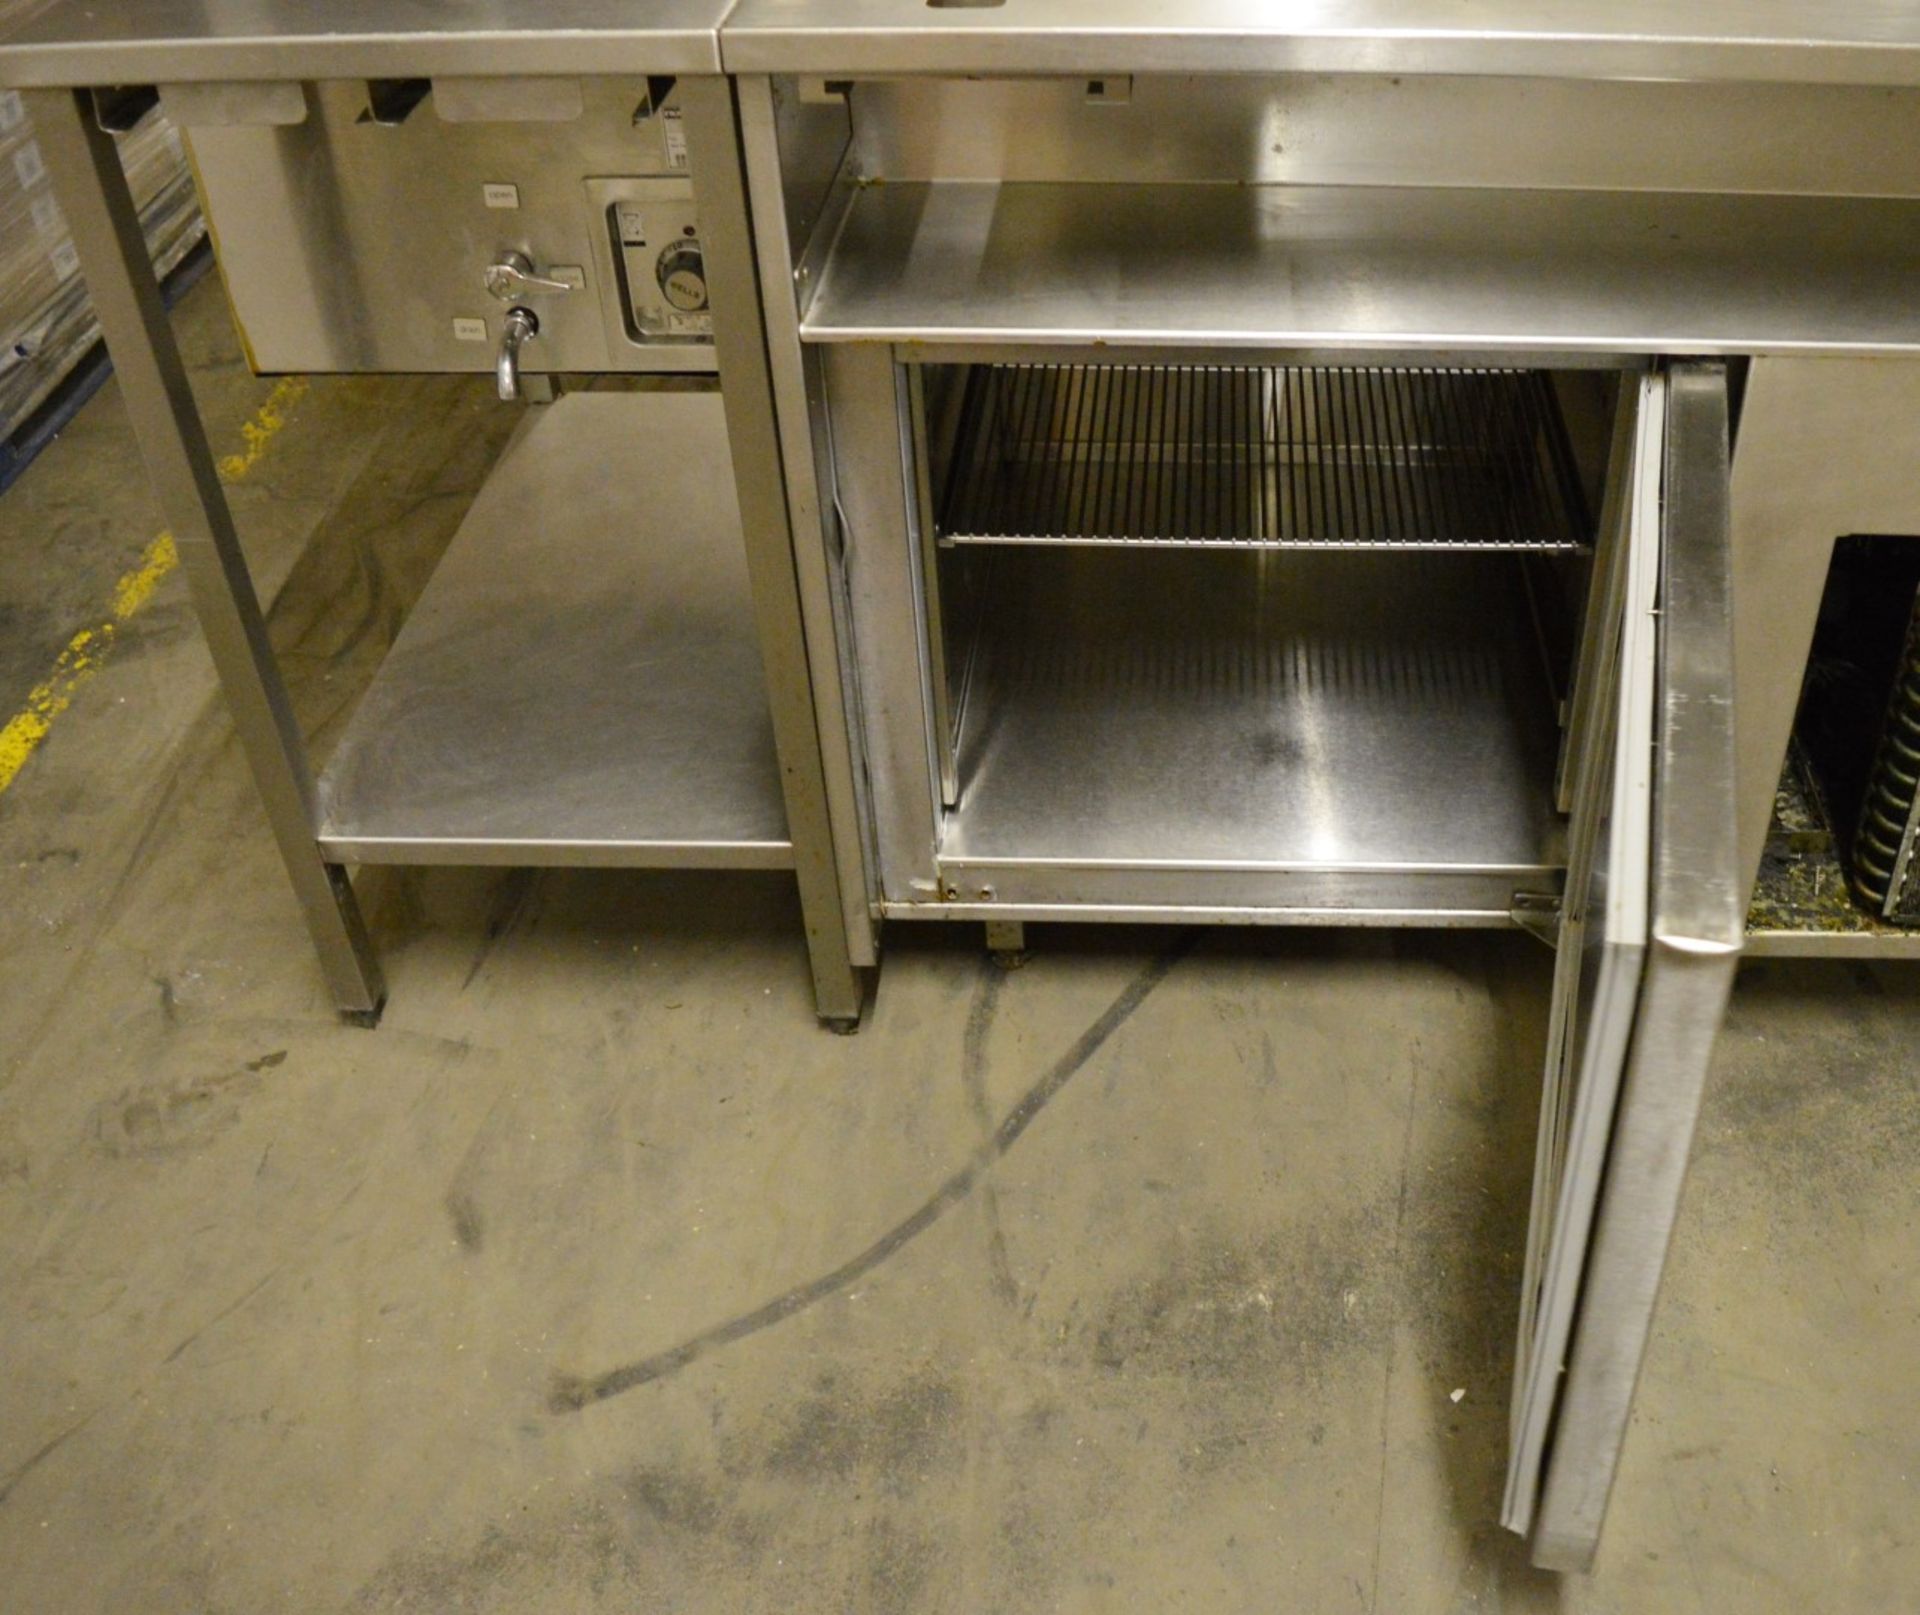 1 x Franke Stainless Steel Prep Table With Single Door Chiller, Fan Cooled Saladette, Wells SS206 - Image 7 of 12